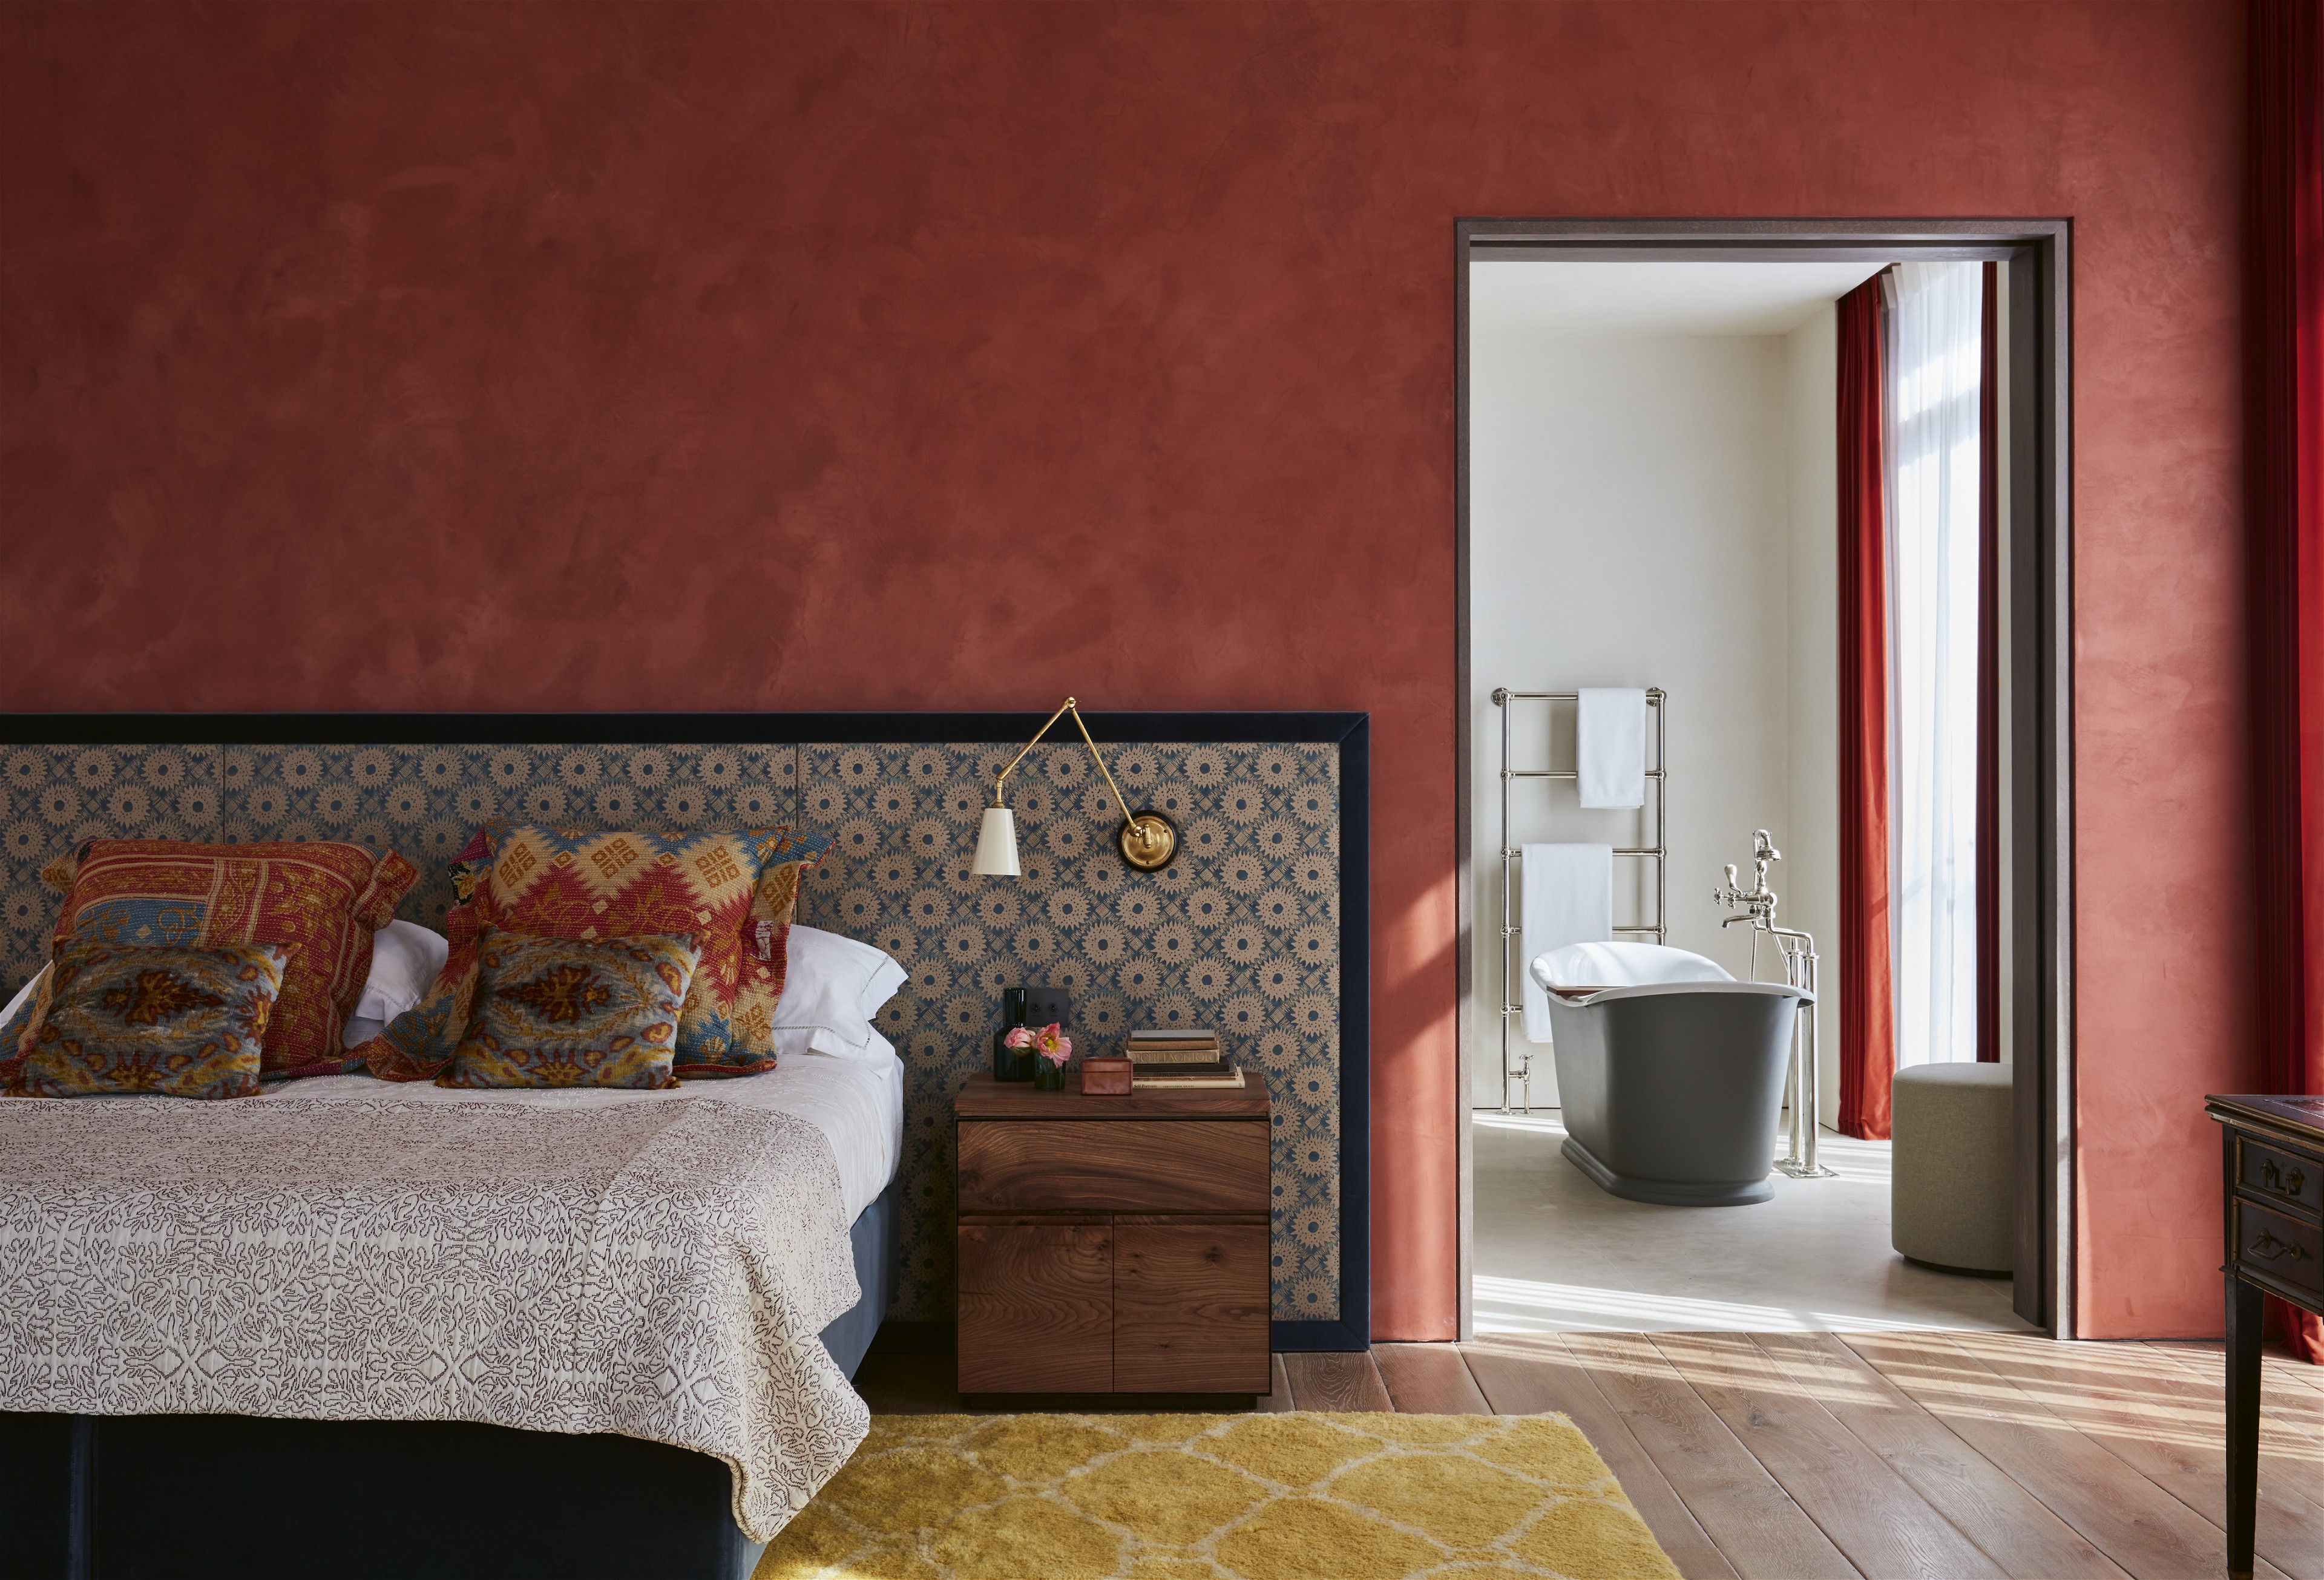 a bedroom with red walls and a bed